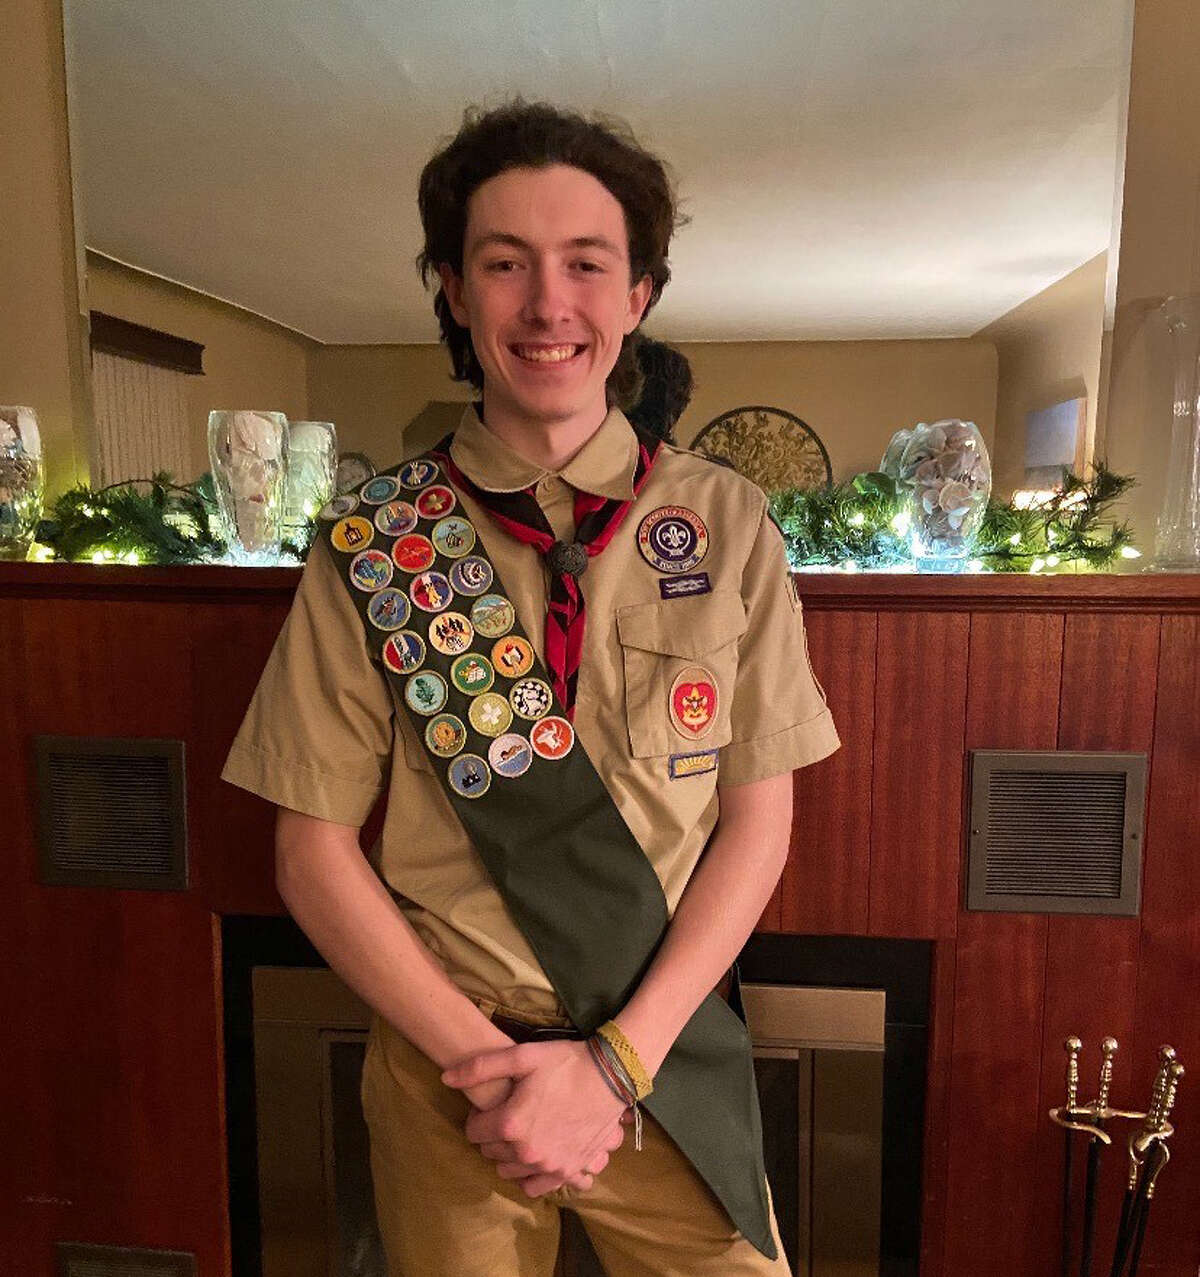 Midland High's Tanner Squires poses at his home on Jan. 28, 2021 after completing his Eagle Scout Board of Review evaluation with the Water and Woods Field Service Council of the Boy Scouts of America via a Zoom meeting.